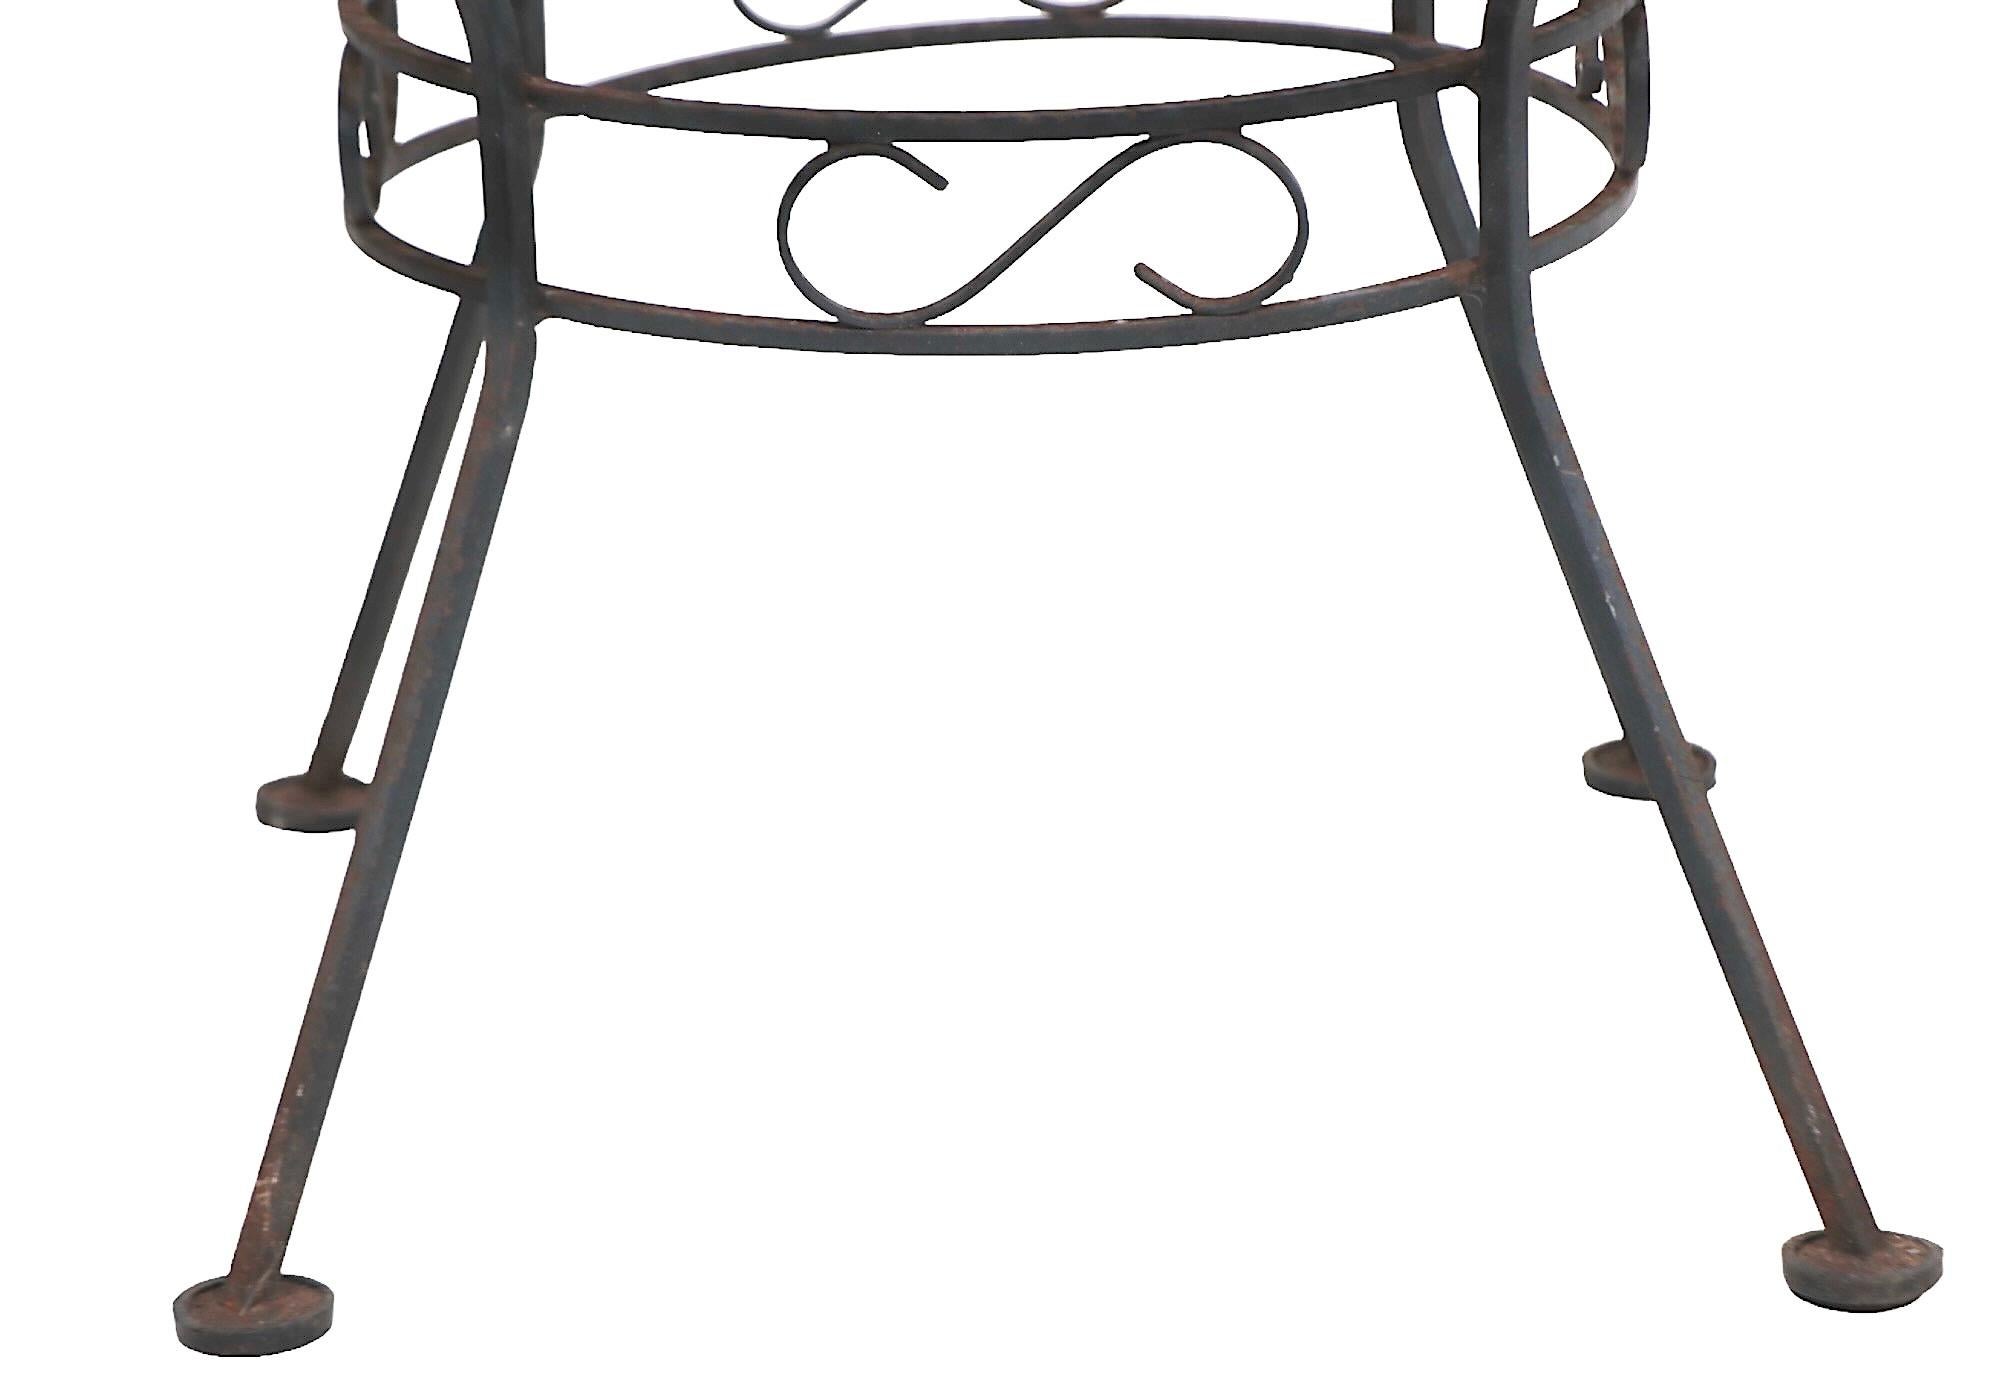 20th Century  Small Wrought Iron  Garden Patio Poolside Table by Woodard c. 1940/60's For Sale